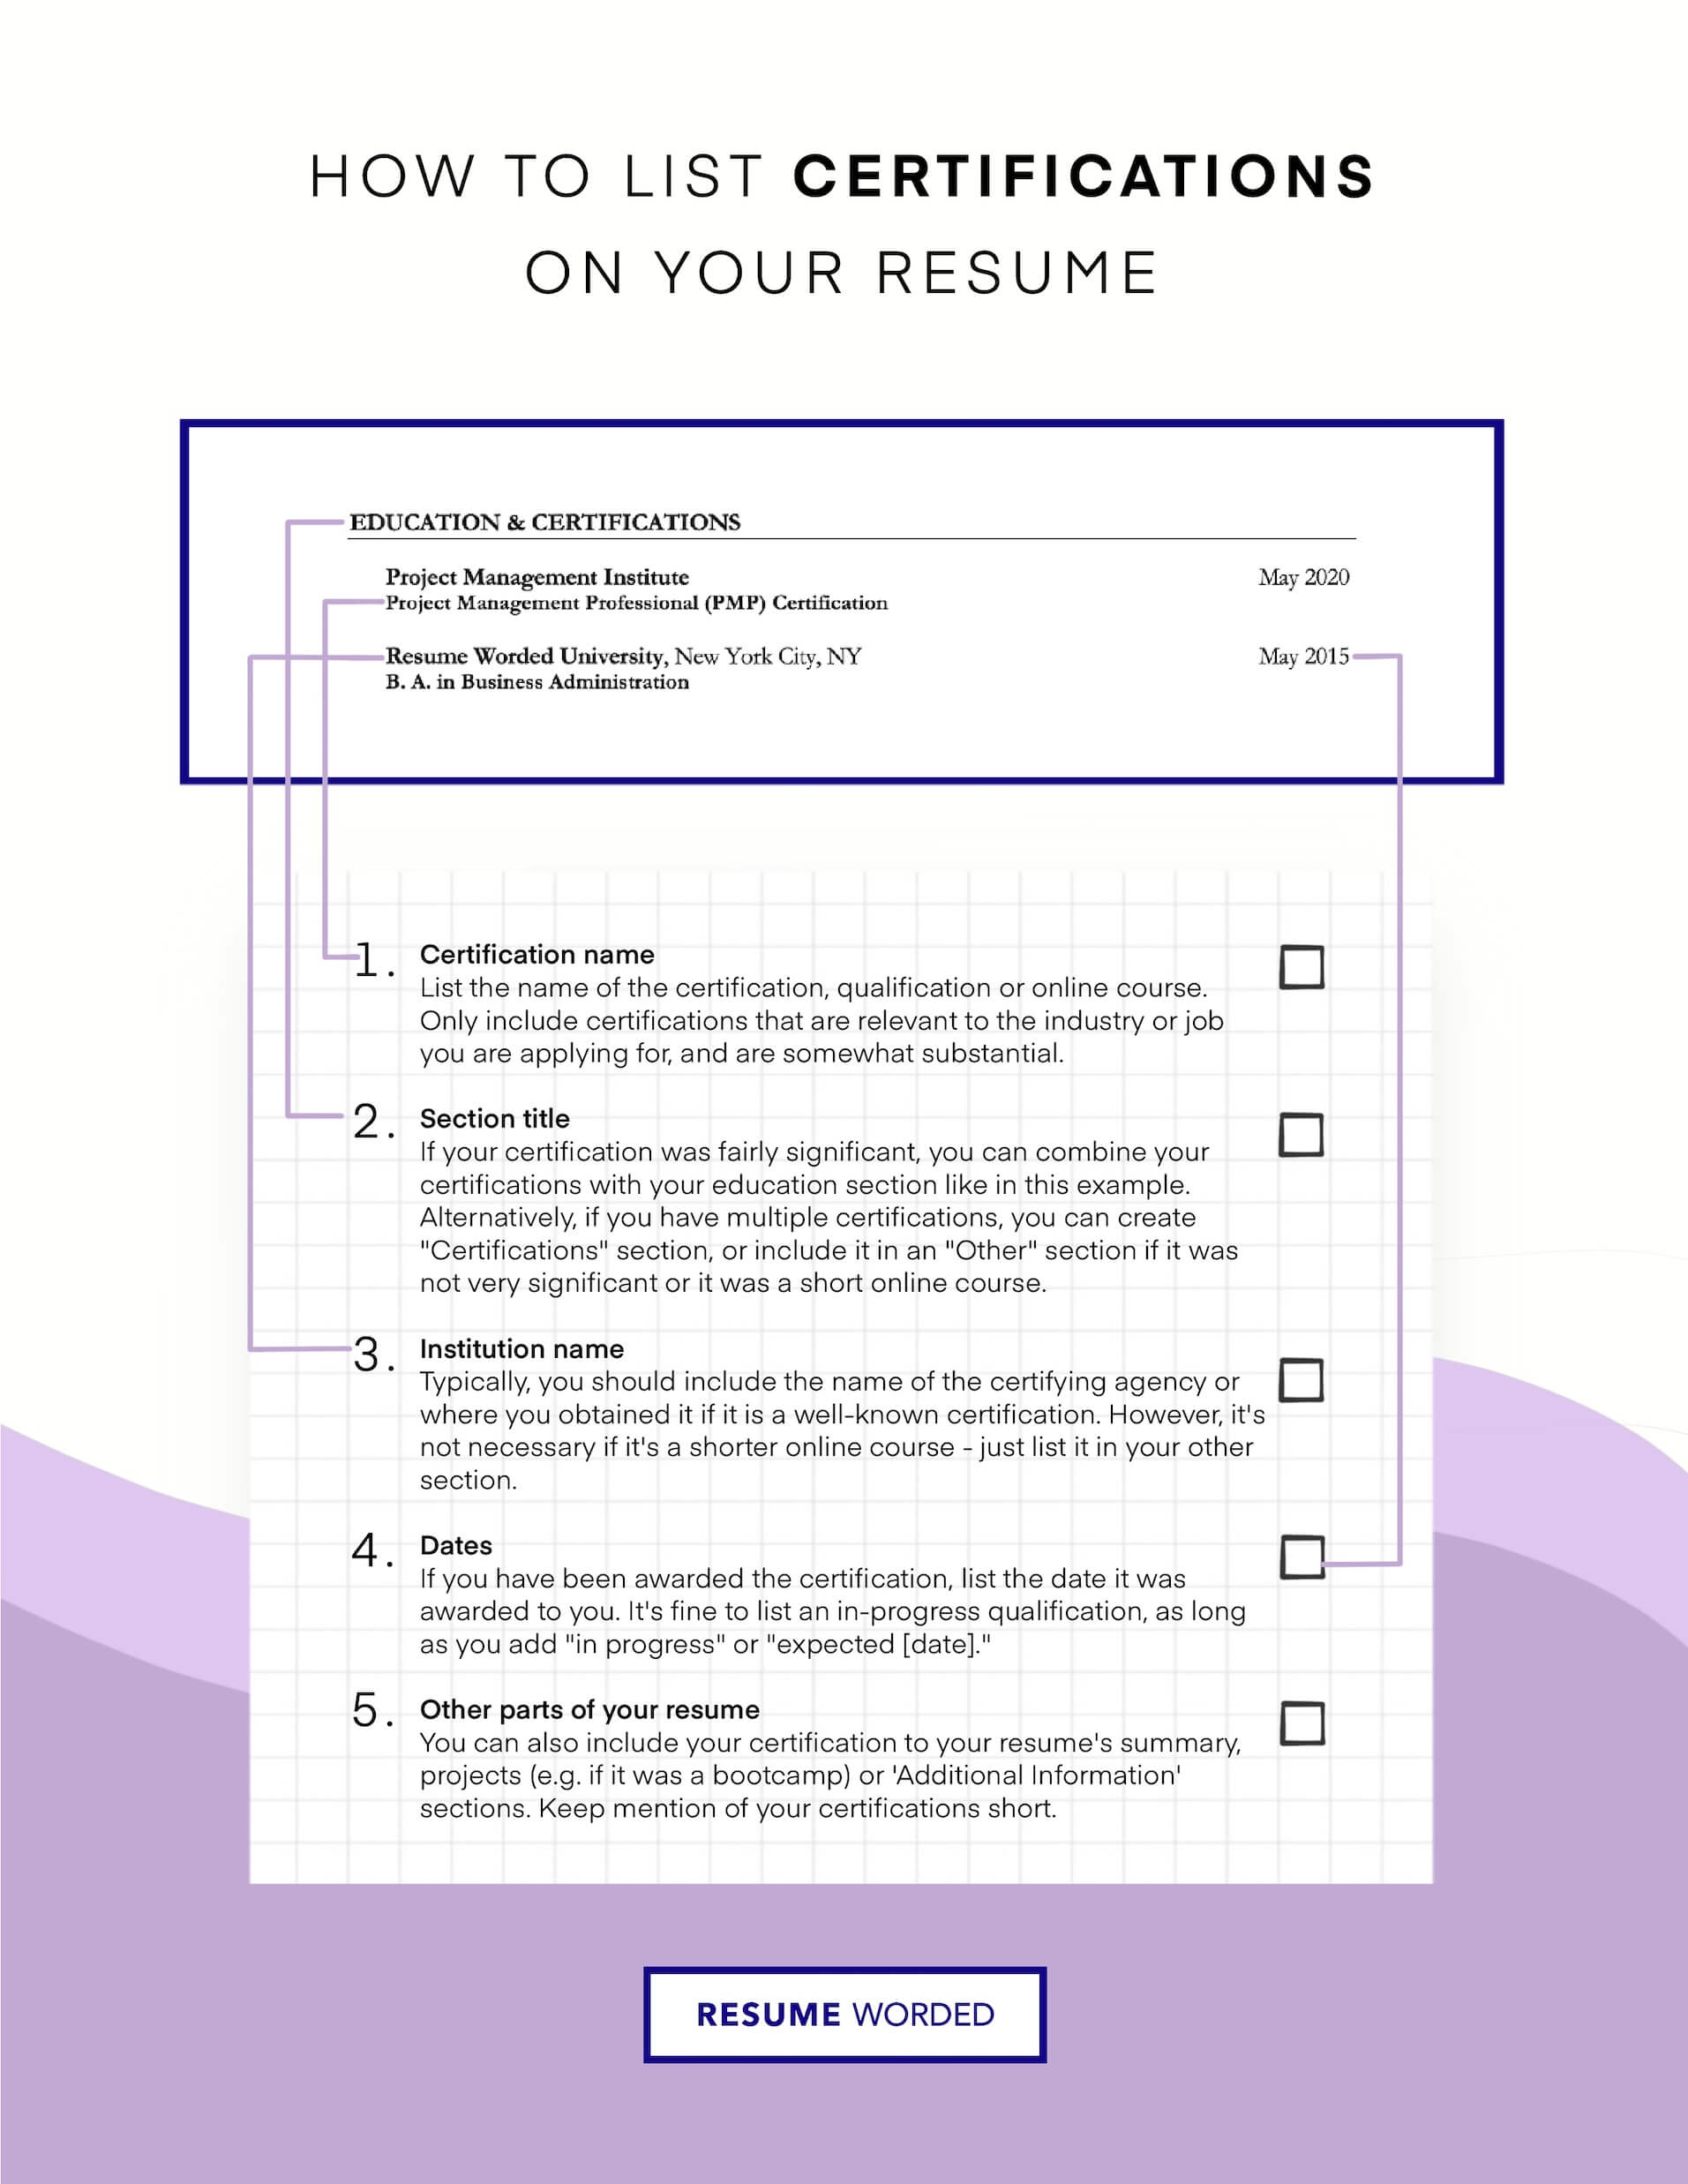 Include your certifications if required. - Compliance Attorney Resume